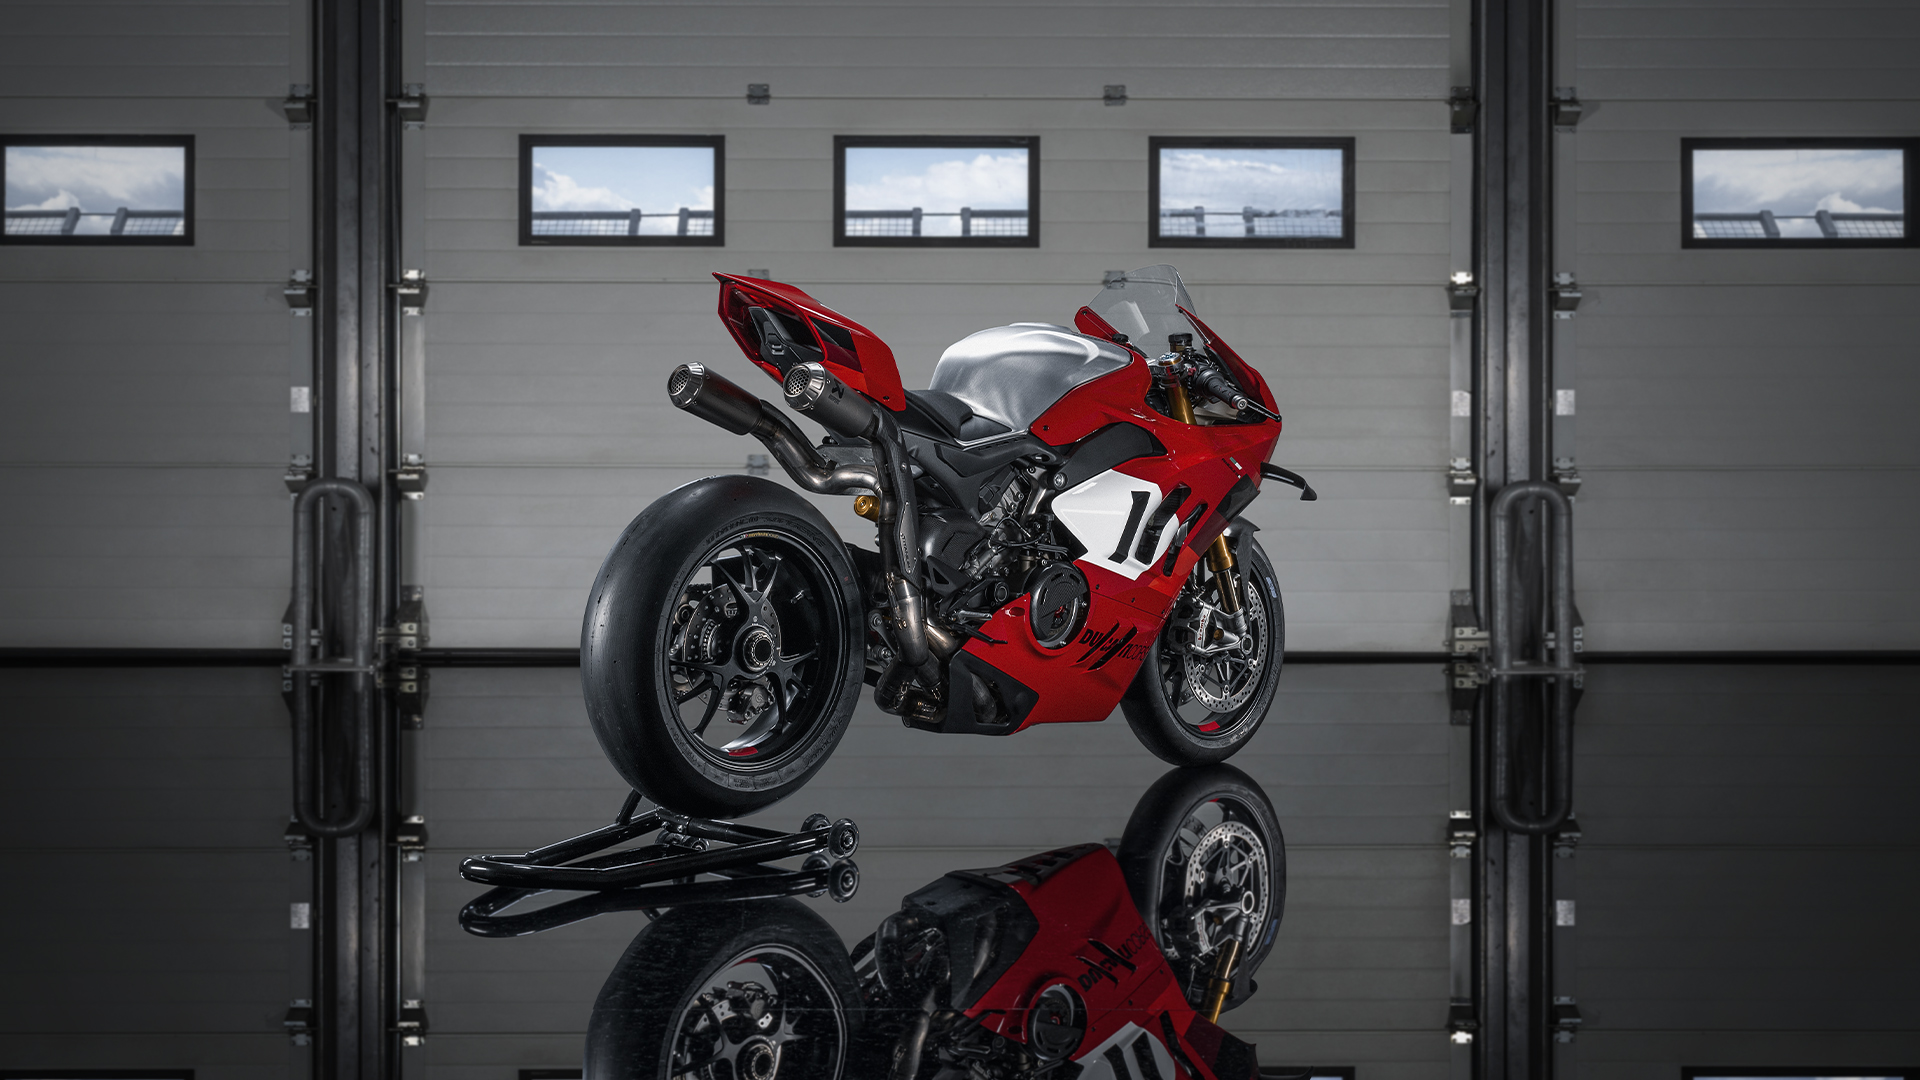 Ducati-Panigale-V4R-MY23-performance-gallery-02-04-1920x1080